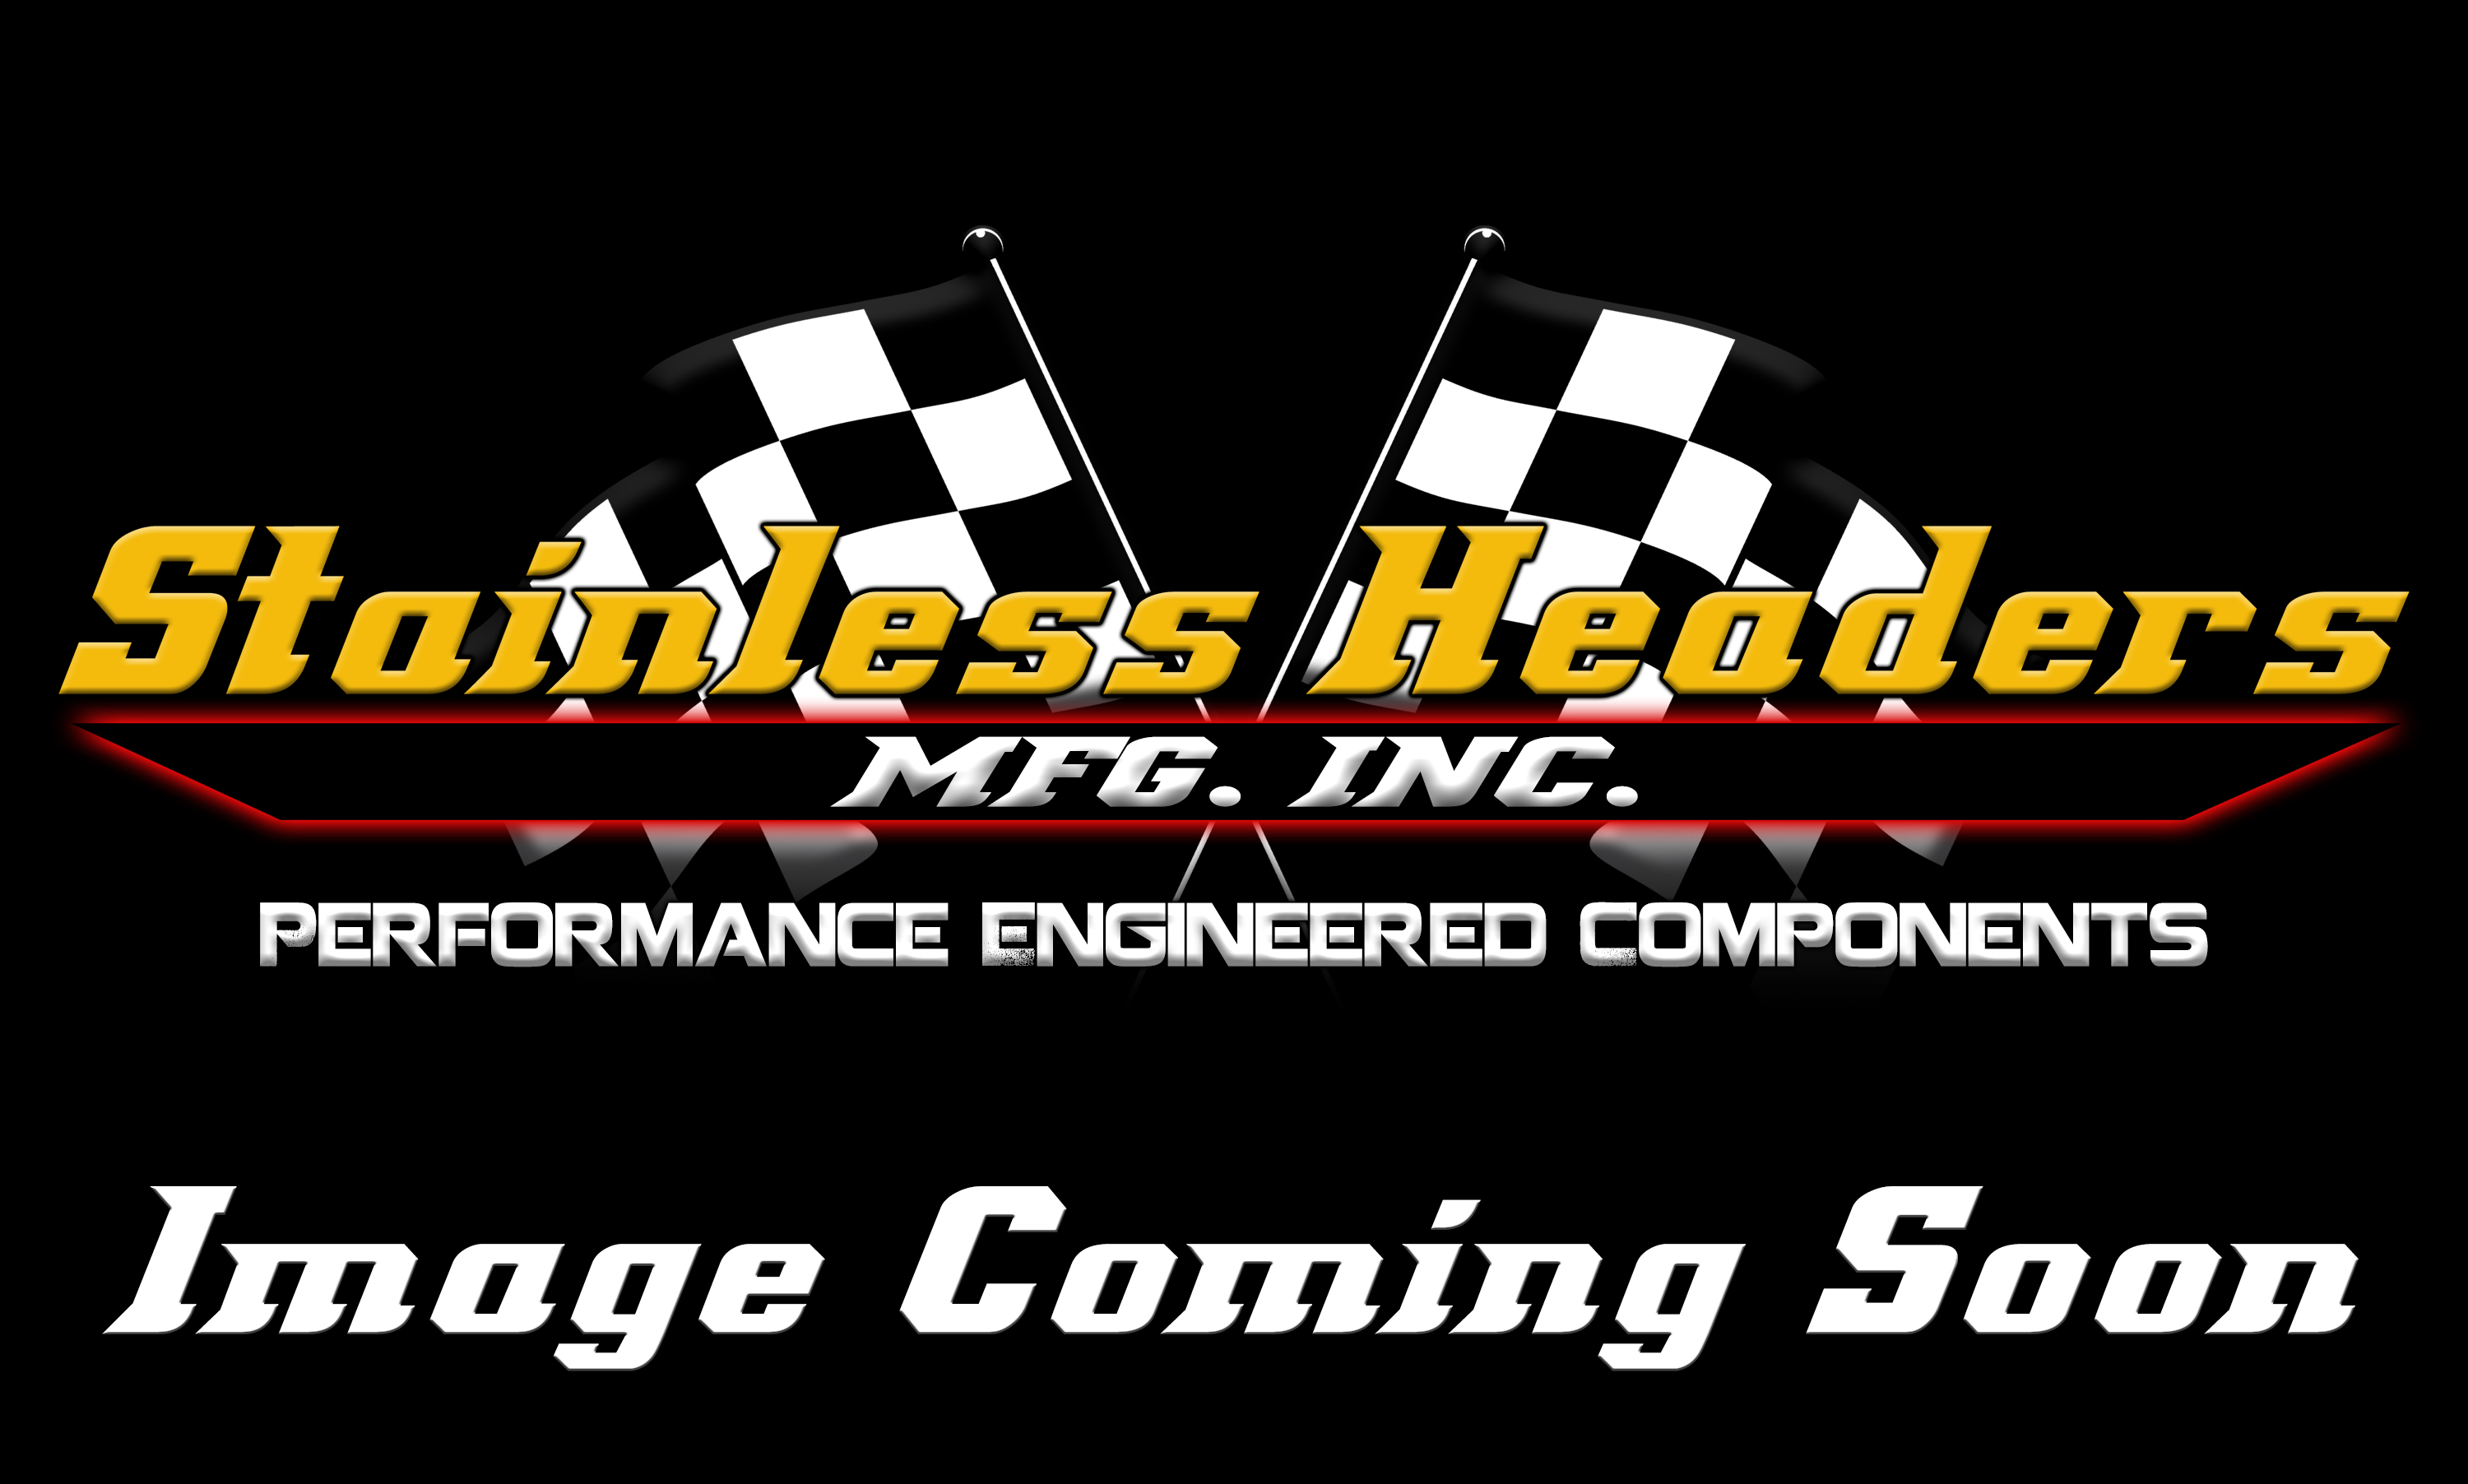 Stainless Headers - 2 3/8" Primary 6 into 1 321 Stainless Steel Performance Merge Collector-16ga 304ss - Image 2